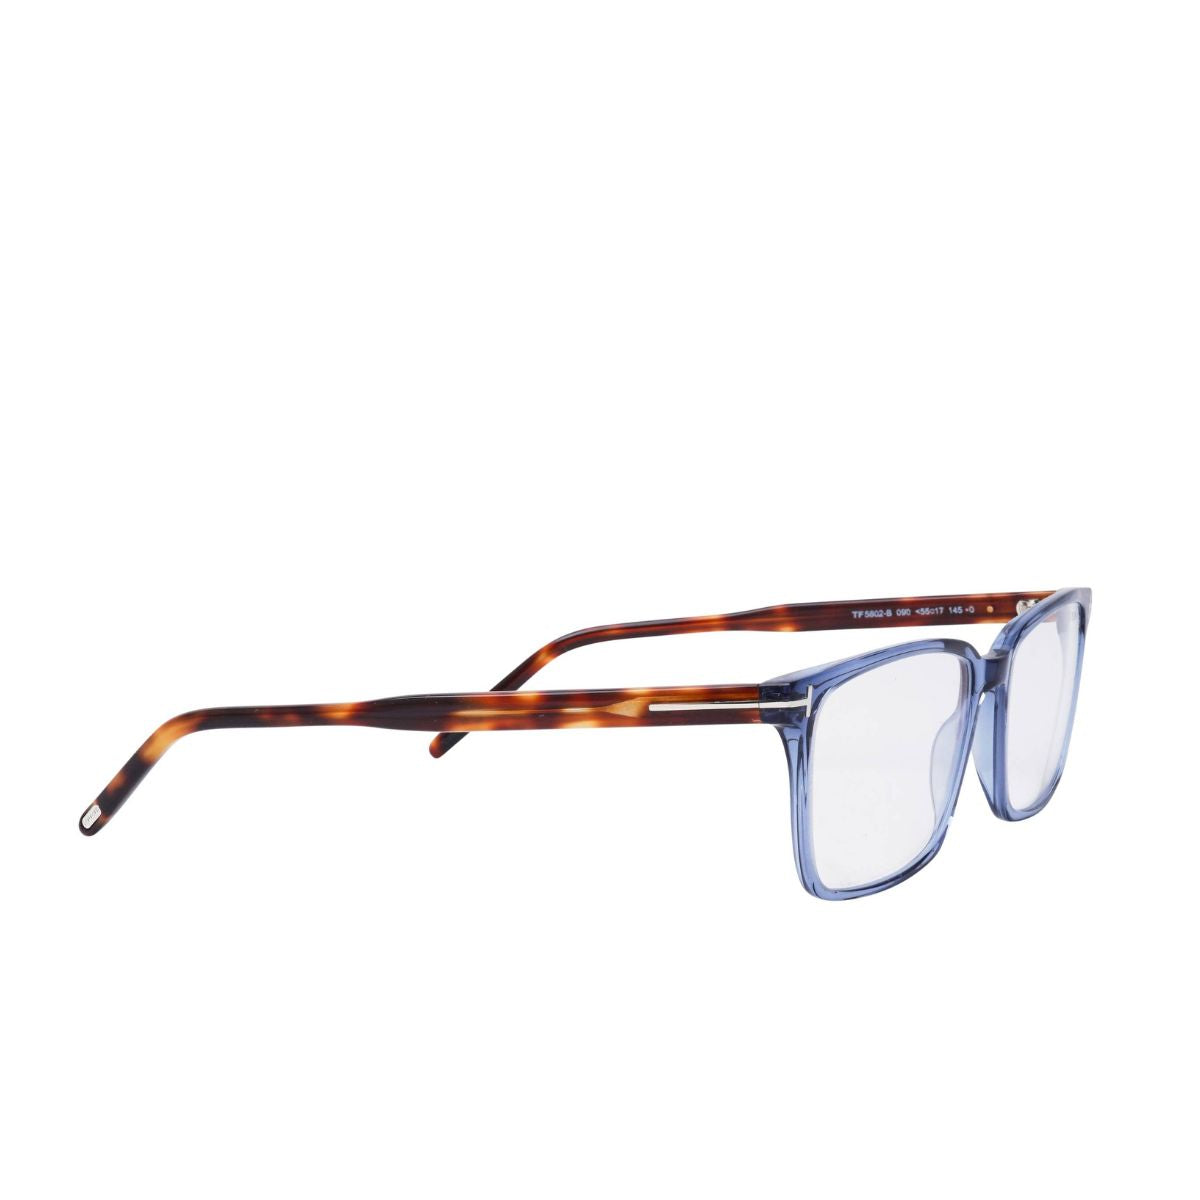 "shop Tom Ford 5802-B 090 spactacle glasses frame for men and women online at optorium"